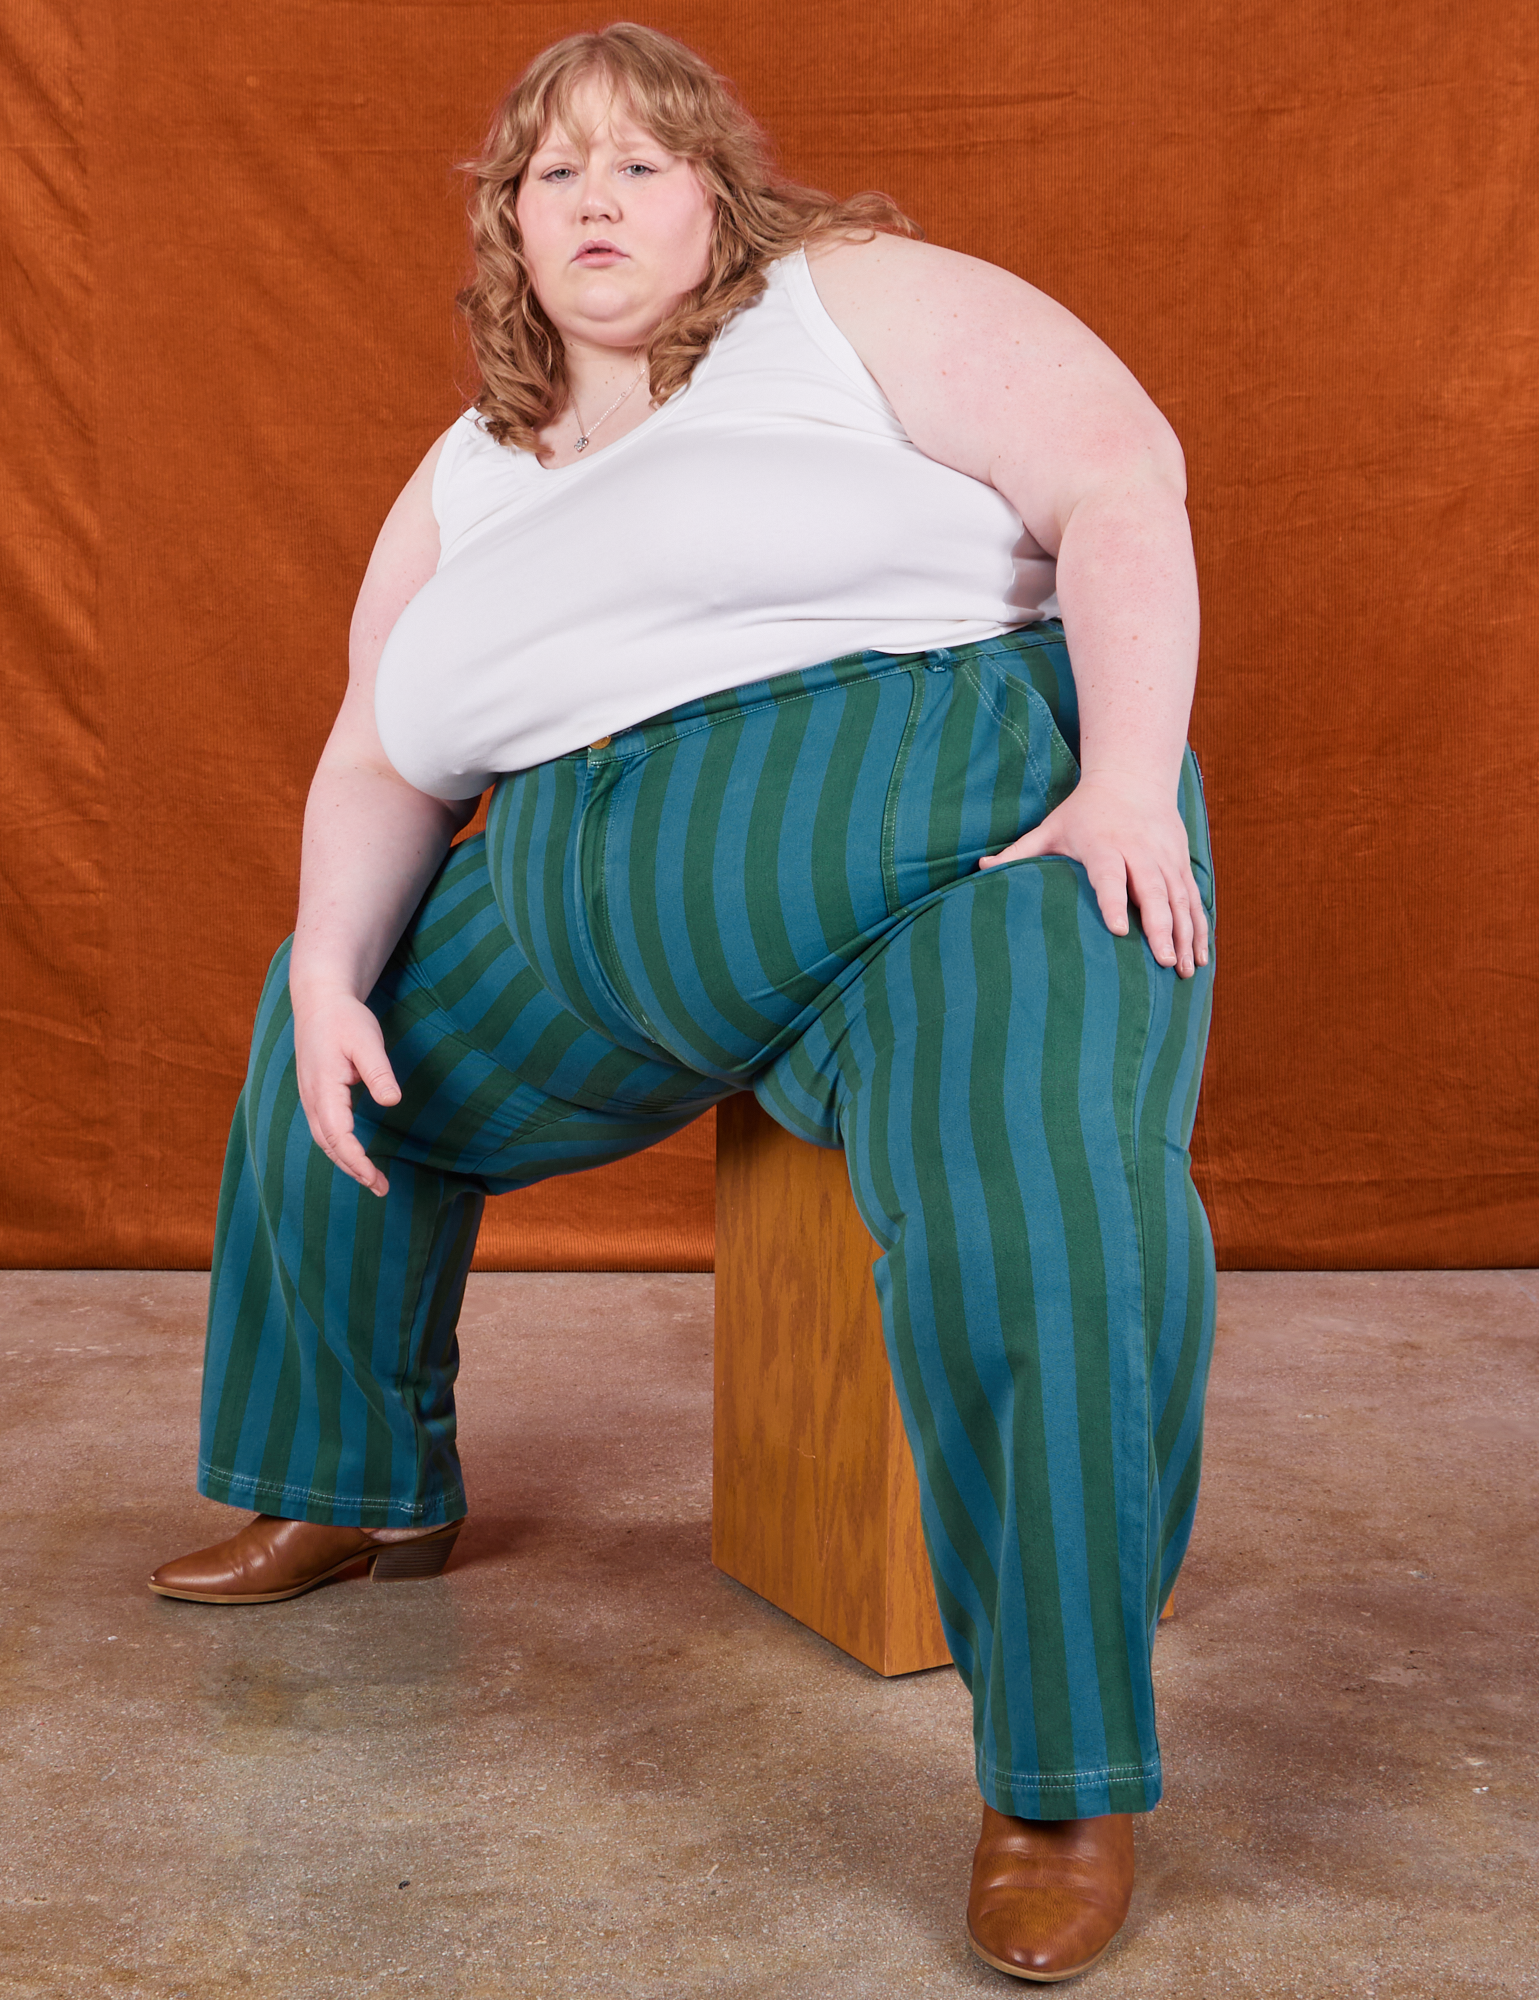 Catie is wearing Overdye Stripe Work Pants in Blue/Green and vintage off-white Cropped Tank Top